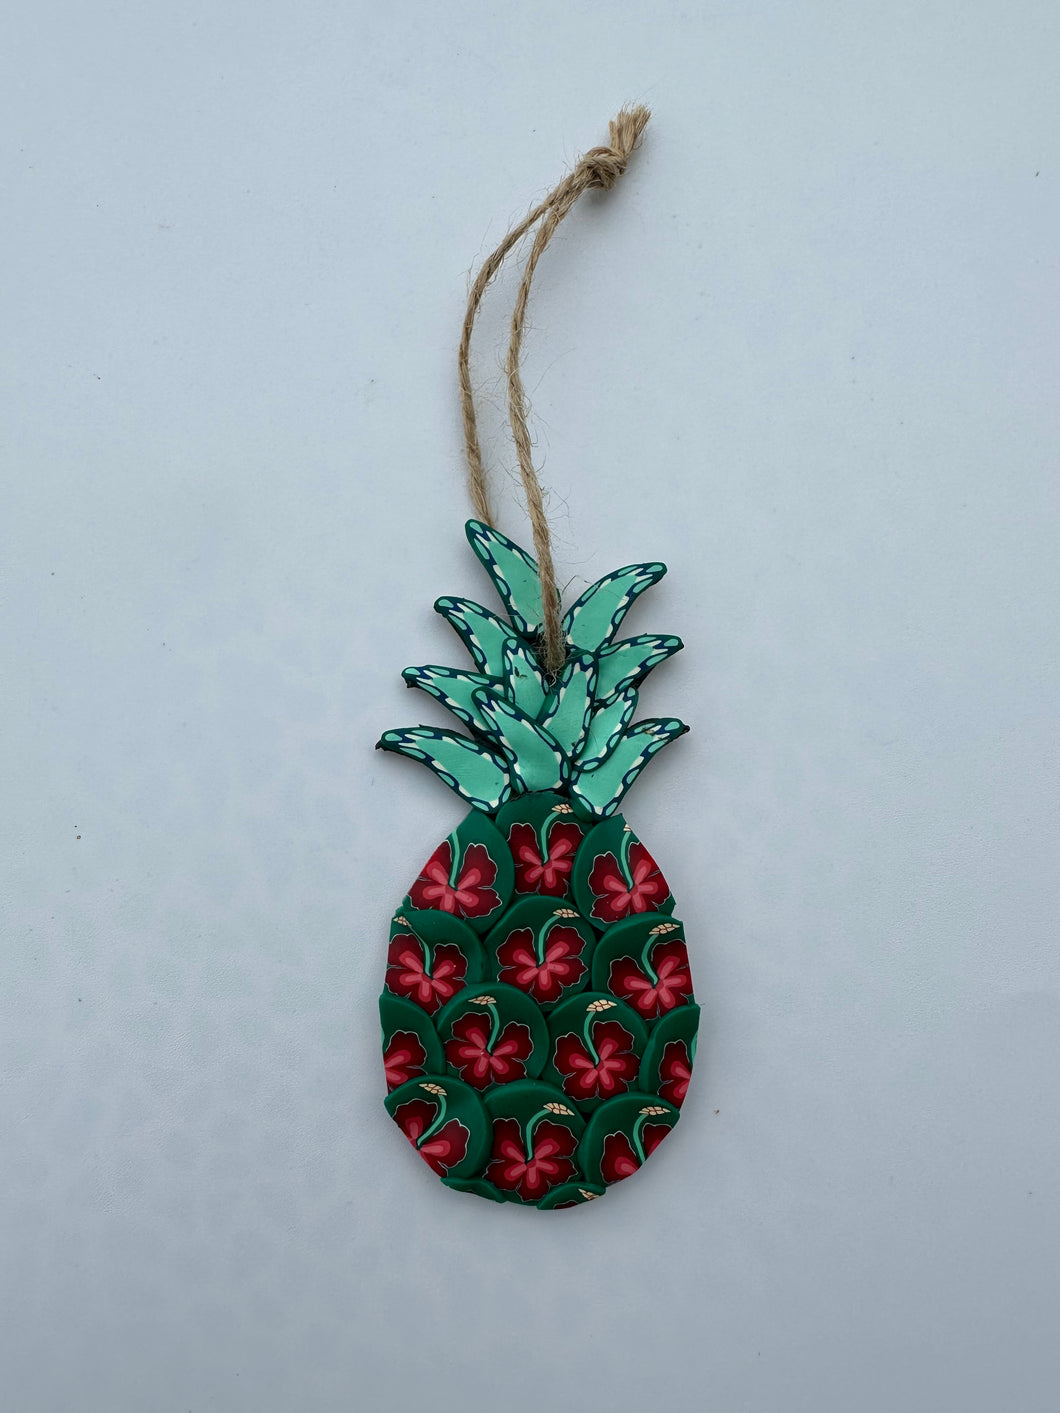 Pineapple ornament with Hibiscus